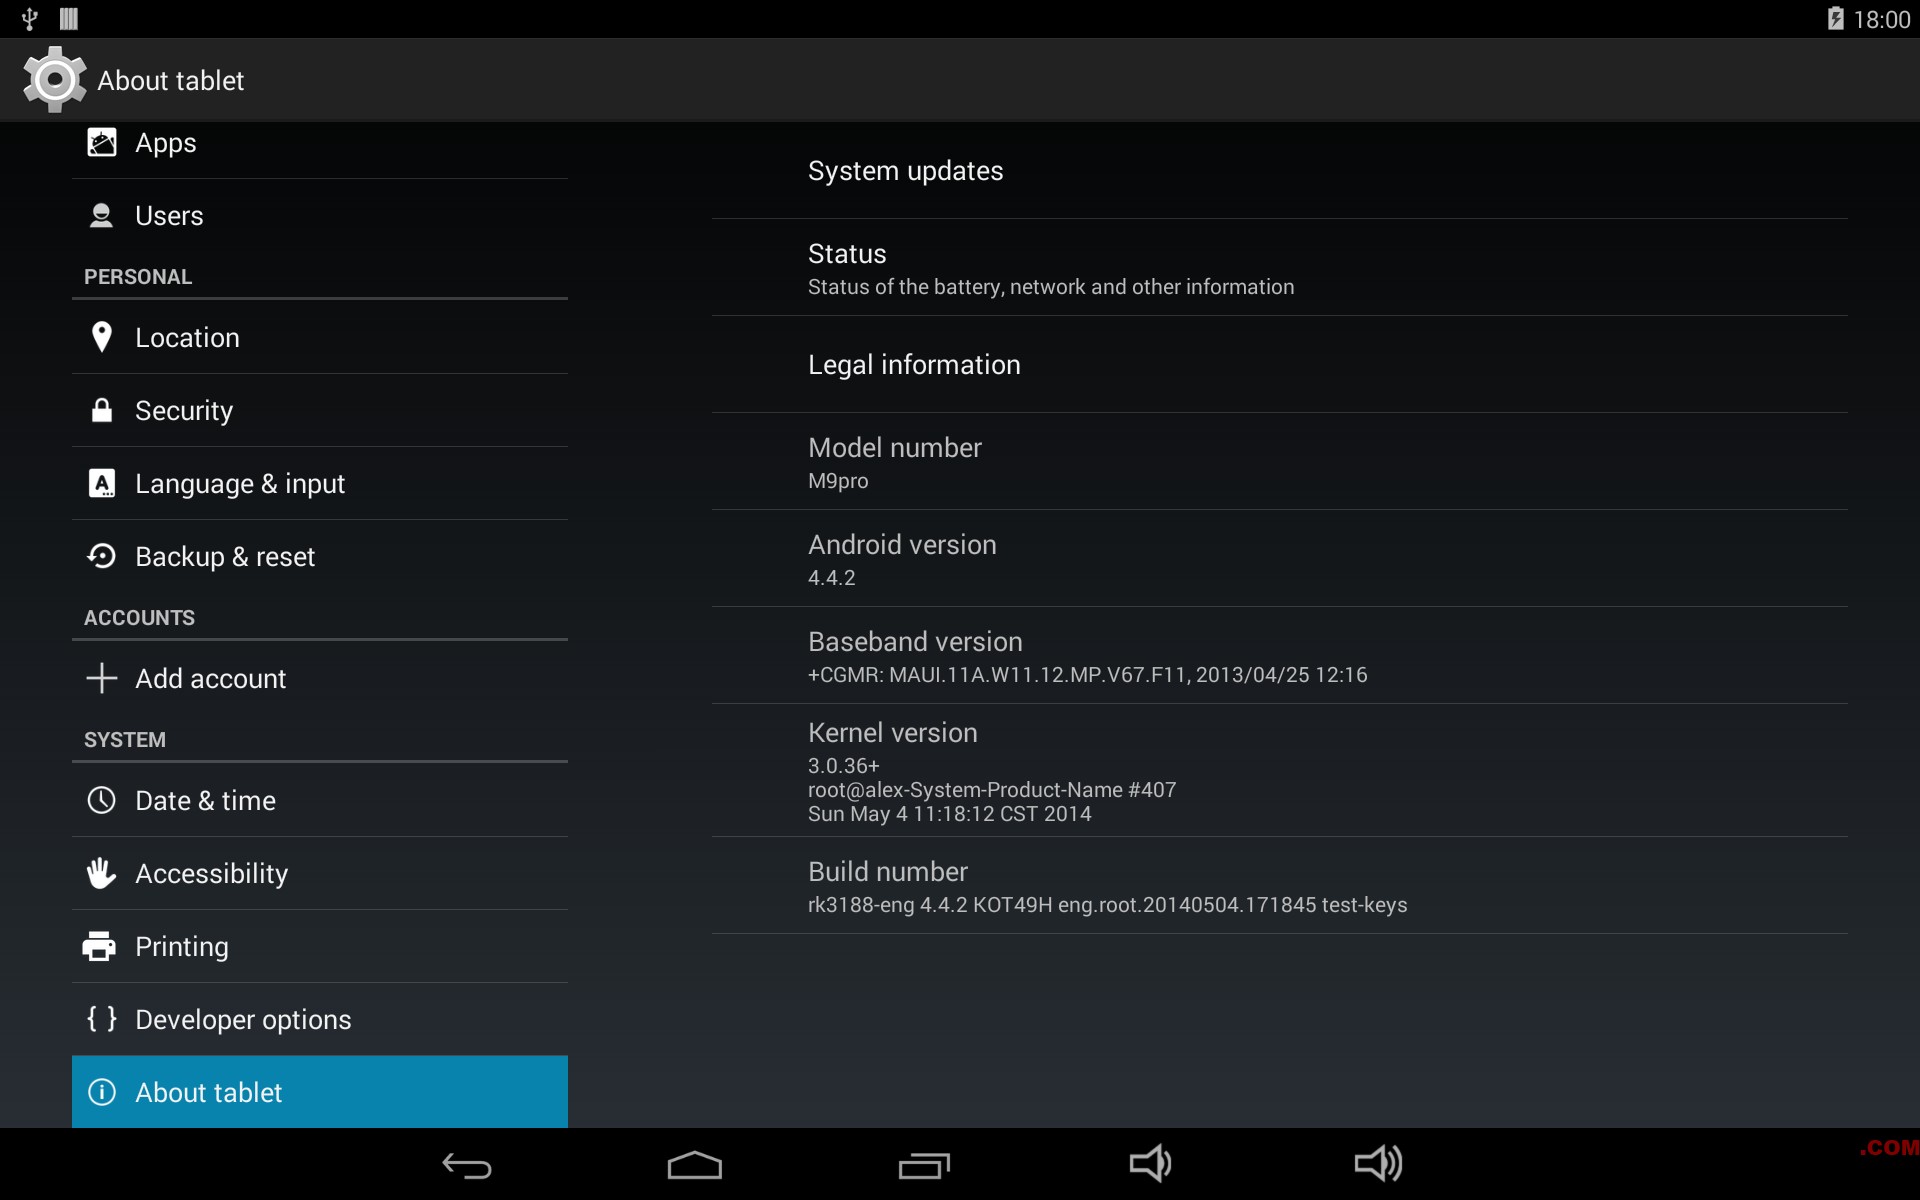 PiPO_M9_Pro_Kitkat_20140504_settings_about.png